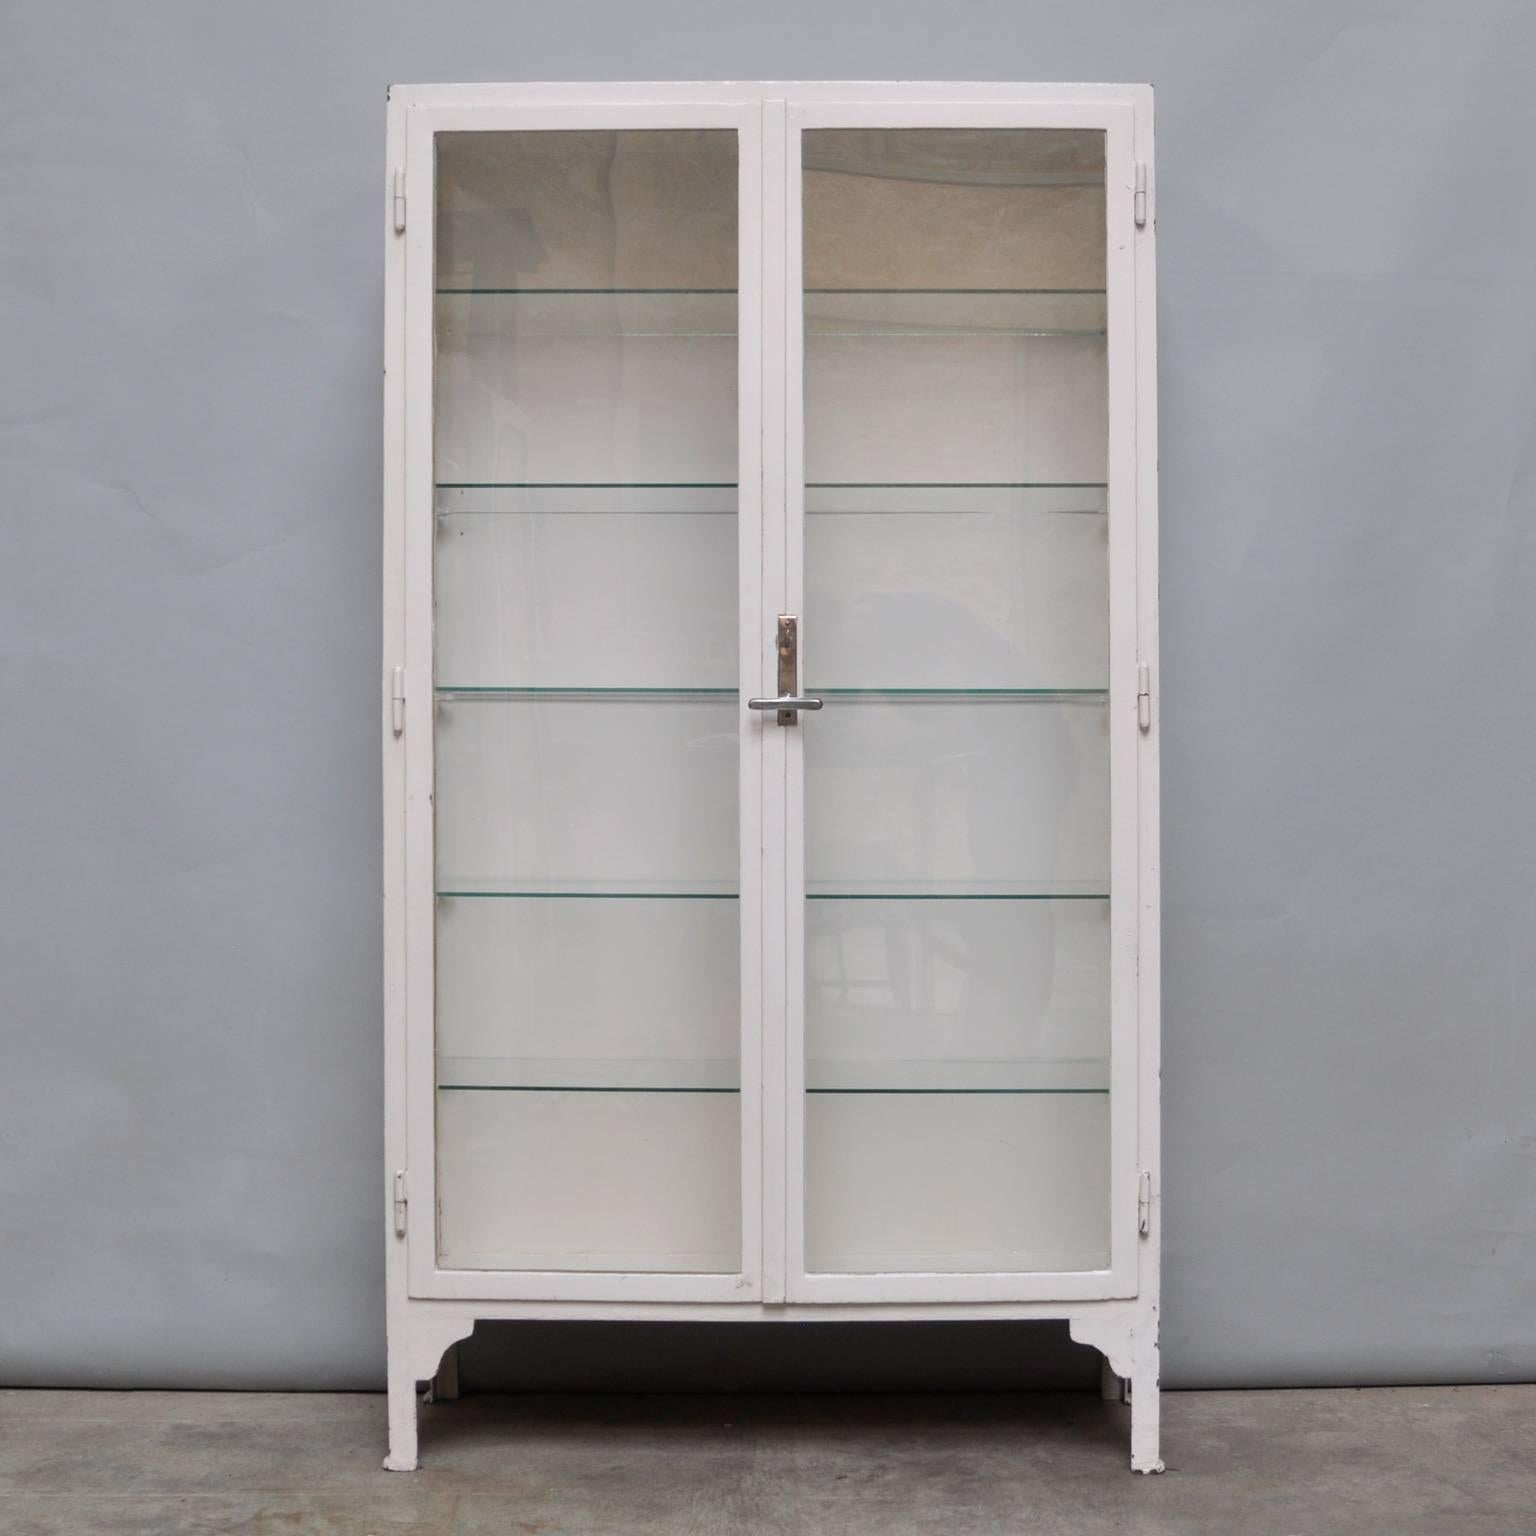 Medical cabinet produced in de, 1940s in Hungary
The cabinet is made of thick iron and antique glass
Features five glass shelves
Some chips of paint missing
The lock is original and functioning
In a good vintage condition.